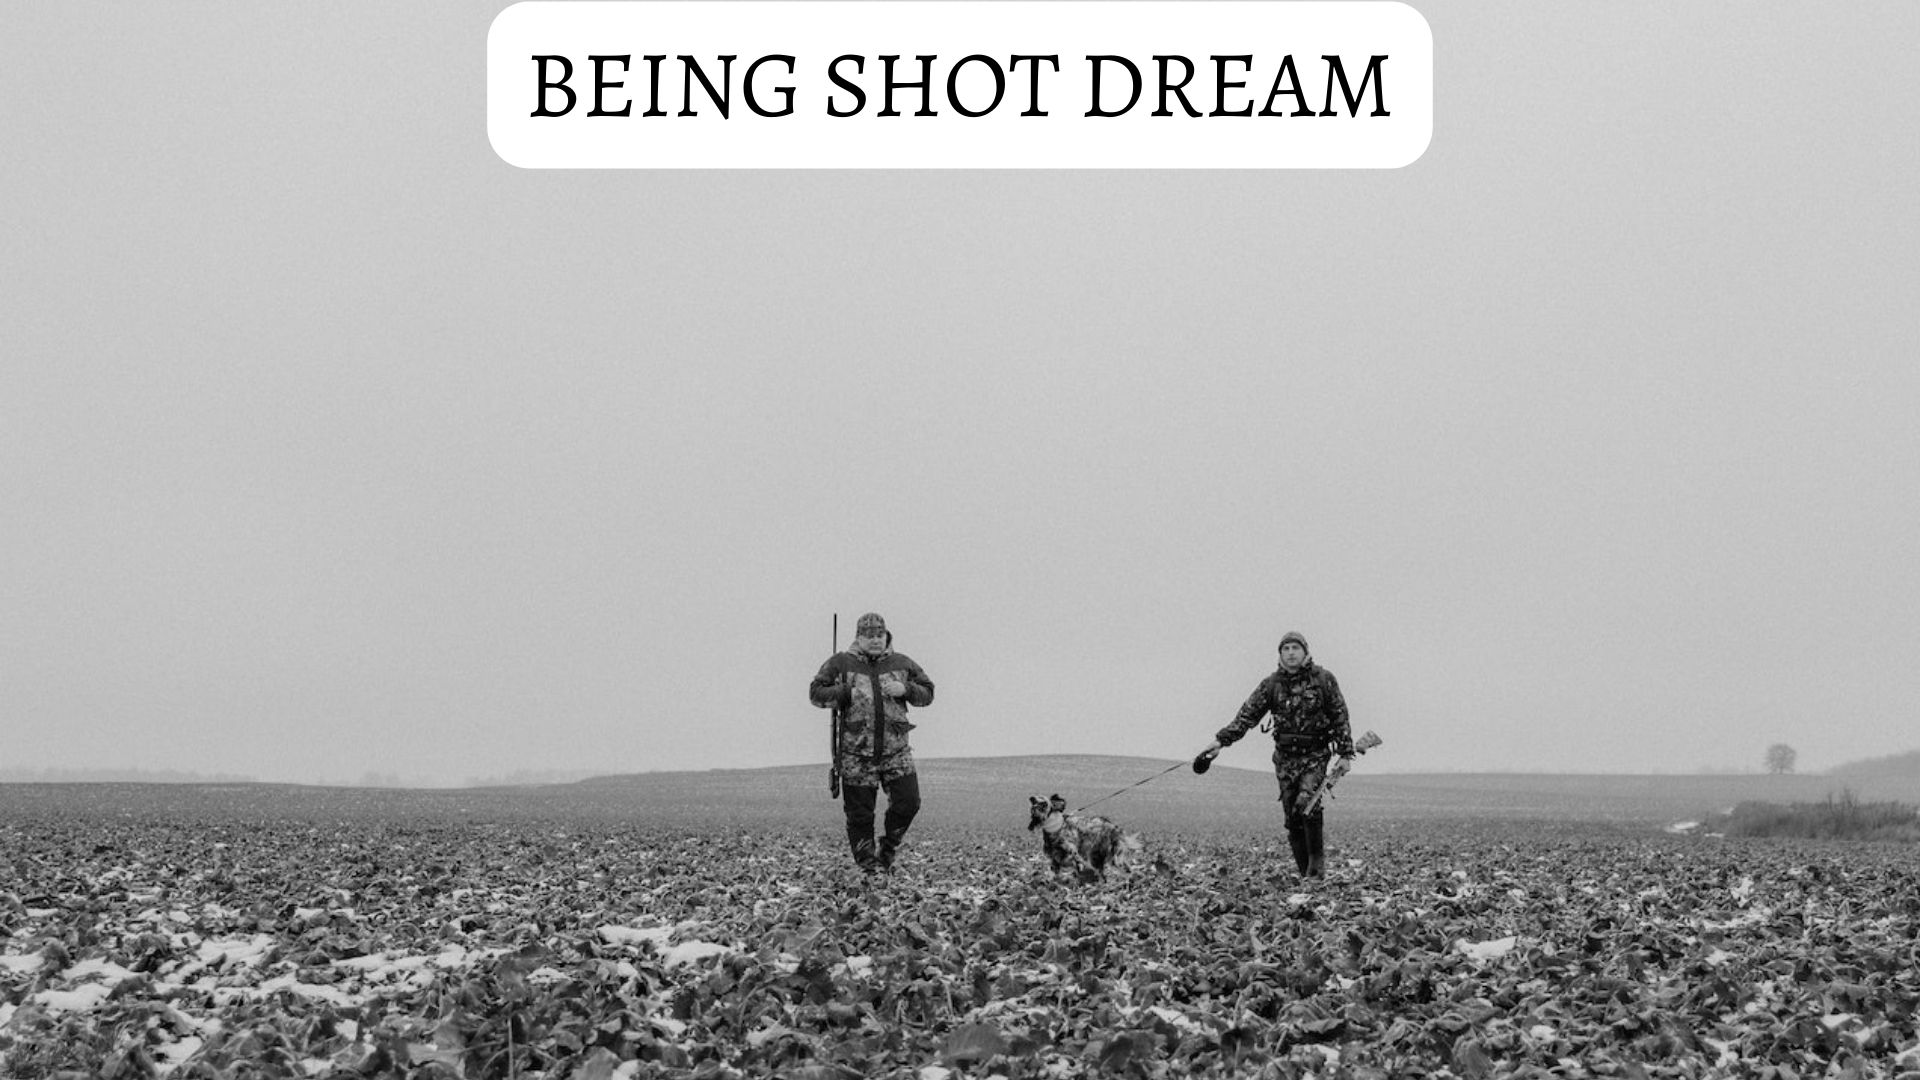 Being Shot Dream - Experiencing Anxiety Or Fear